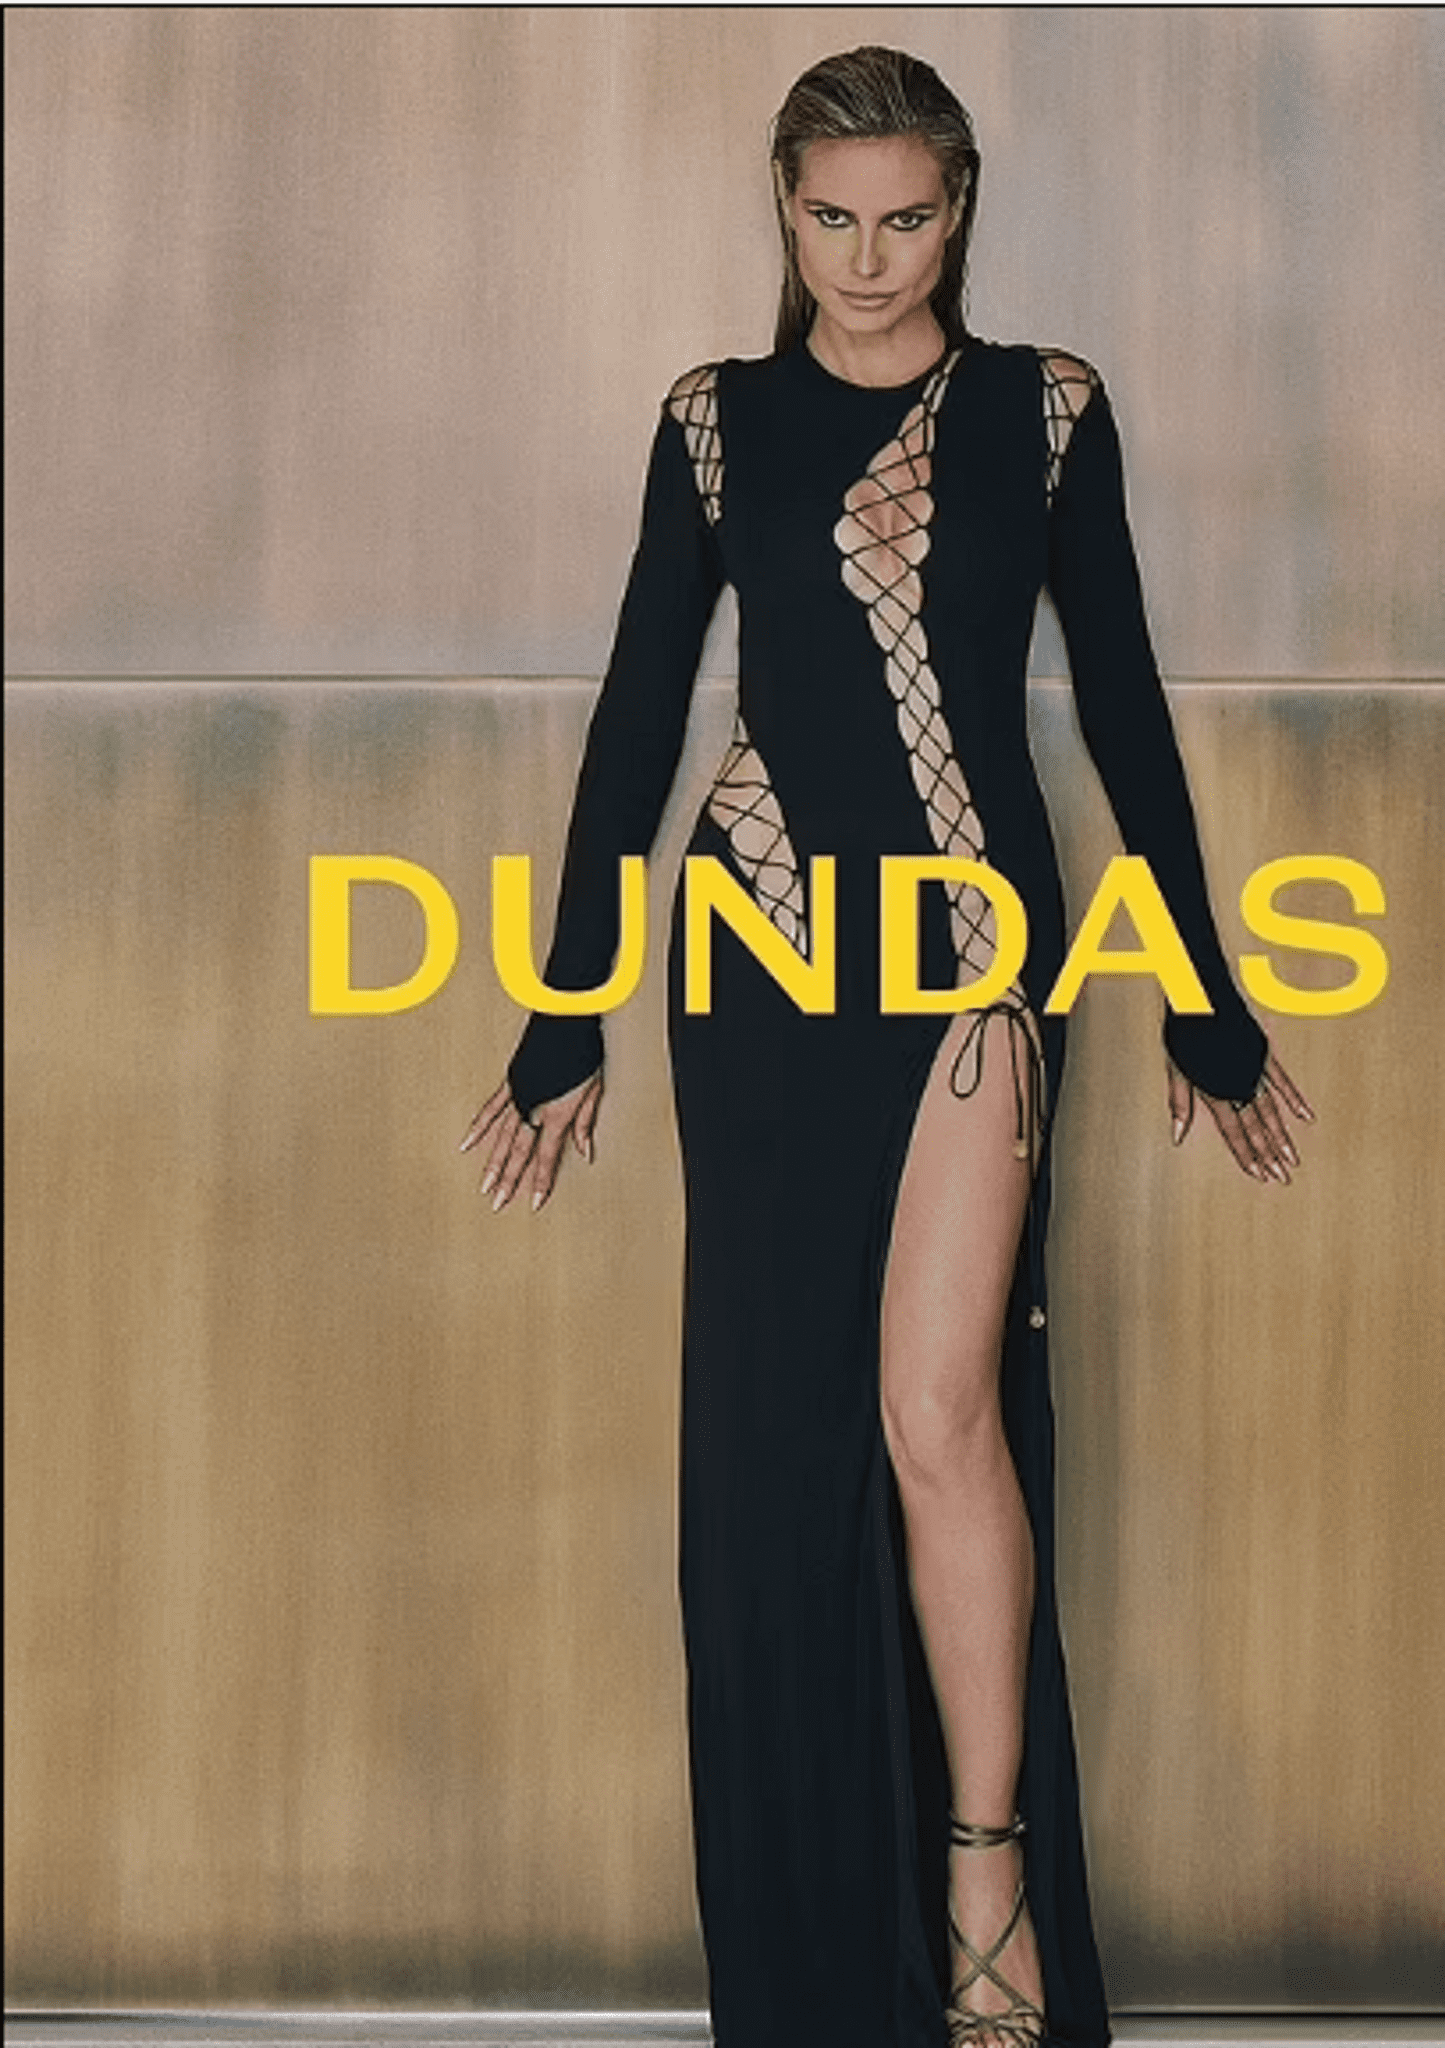 ”heidi-klum-showed-fatal-maxi-dresses-and-skimpy-swimwear-from-the-new-dundas-collection”